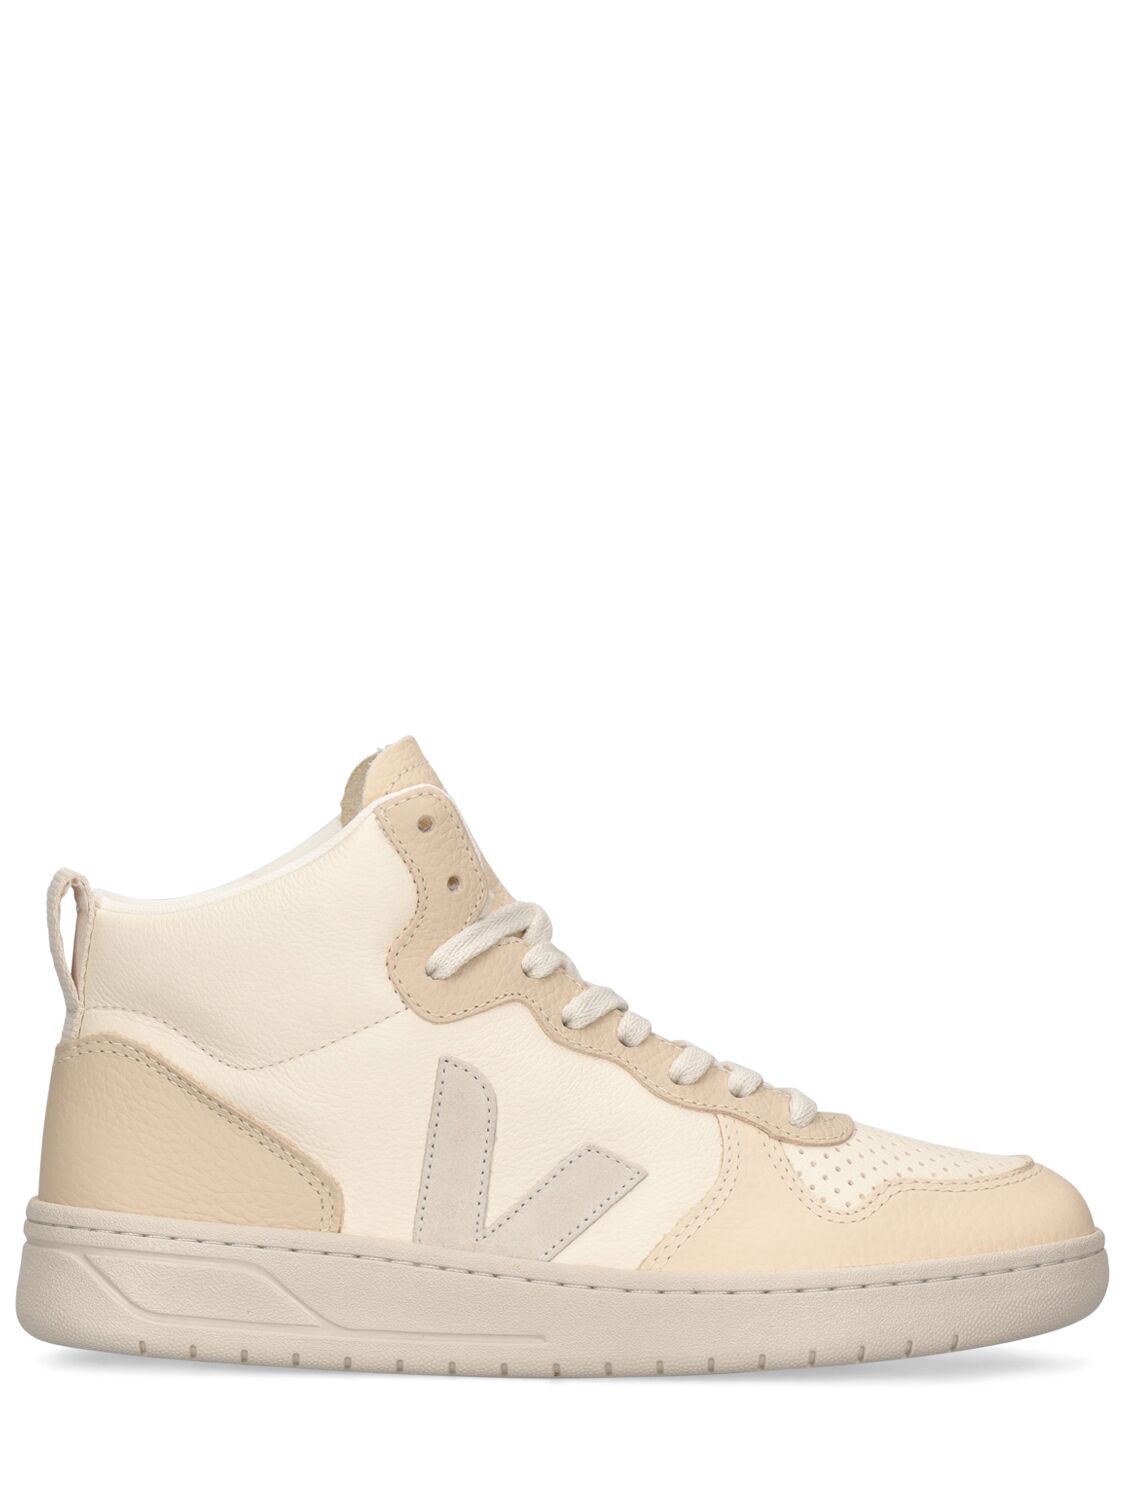 Image of V-15 Leather Sneakers